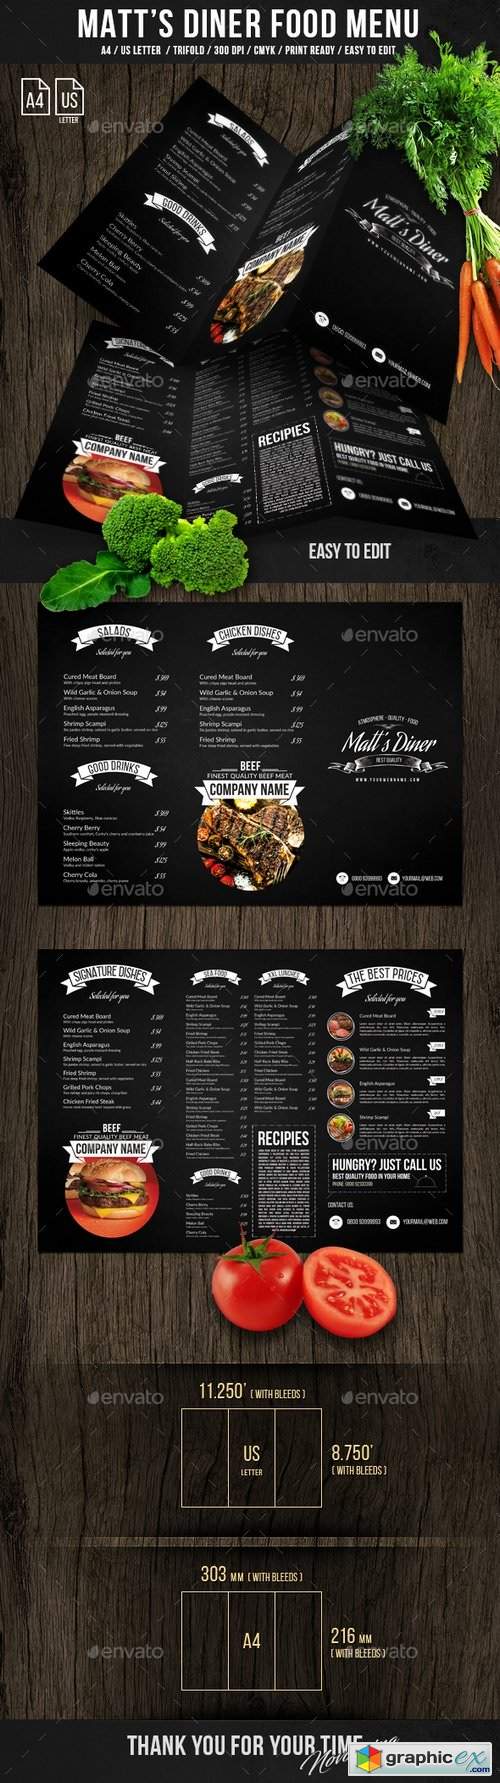 Matt's Diner Trifold A4 and US Letter Menu